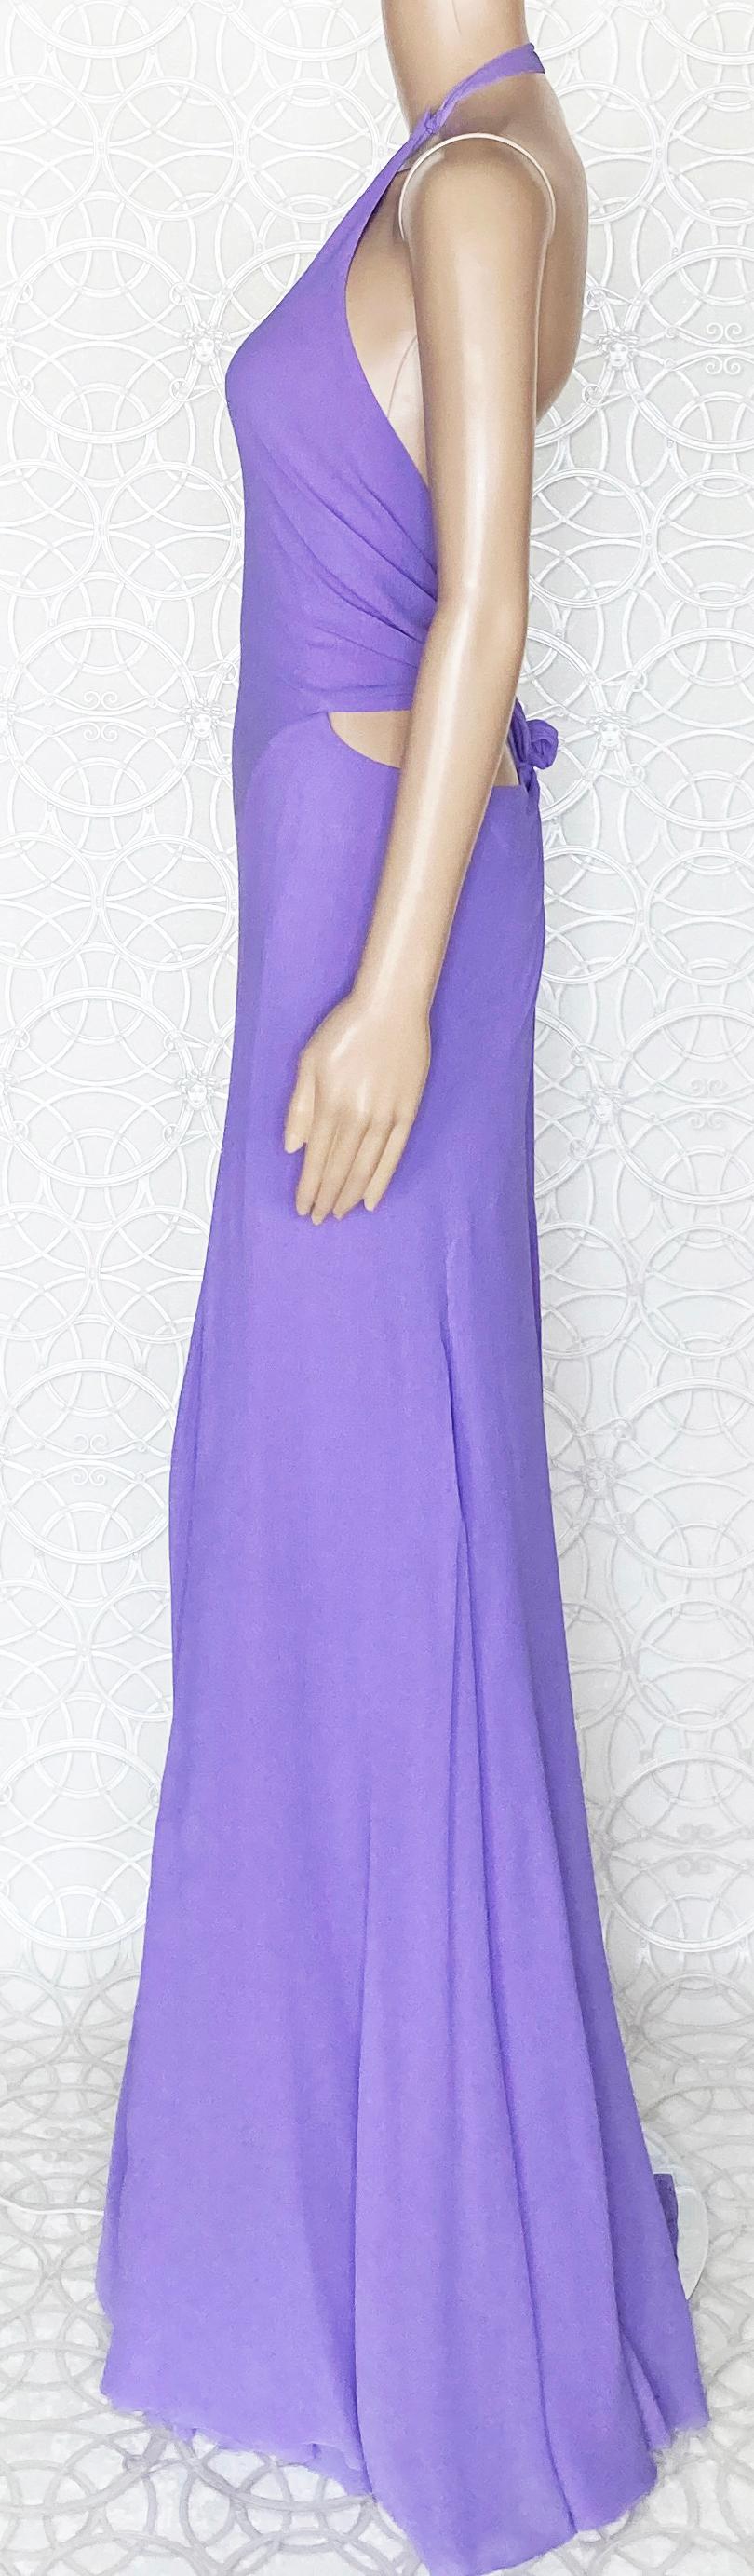 VINTAGE GIANNI VERSACE COUTURE OPEN BACK LILAC SILK DRESS Size 42 - 6 5